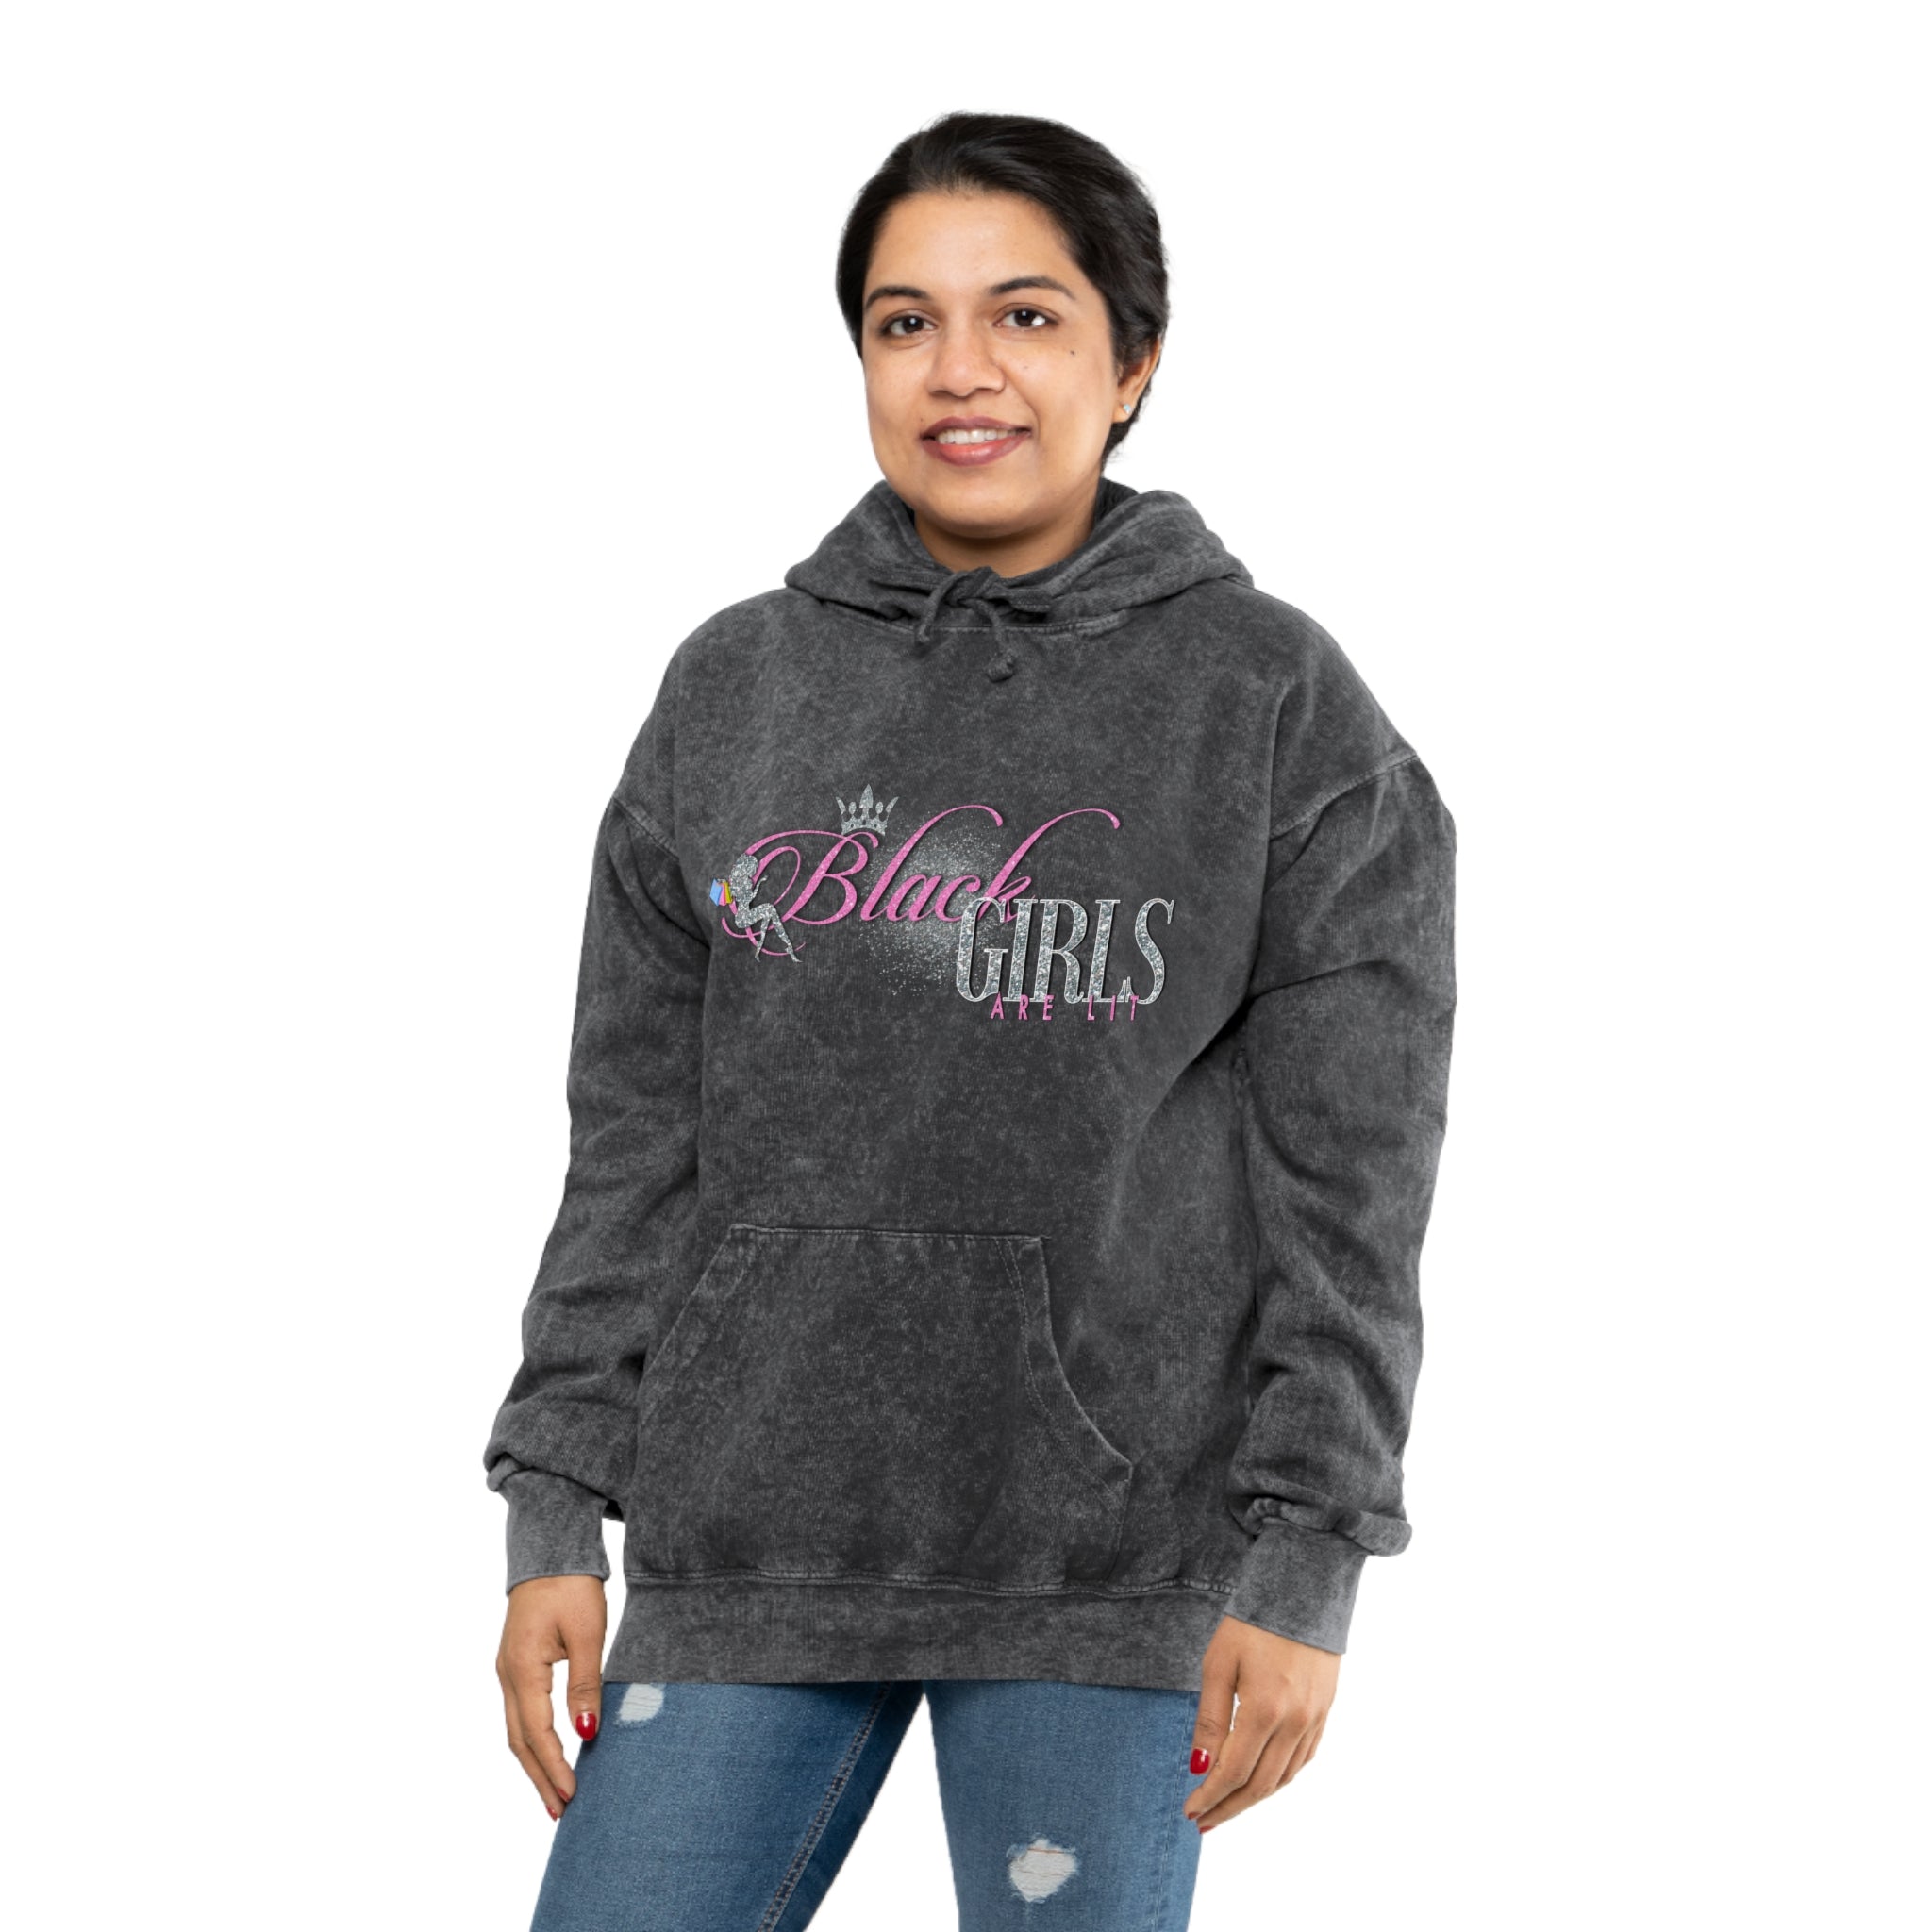 Into The Wild Mineral Wash Unisex Hoodie - The Happy Clothing Company